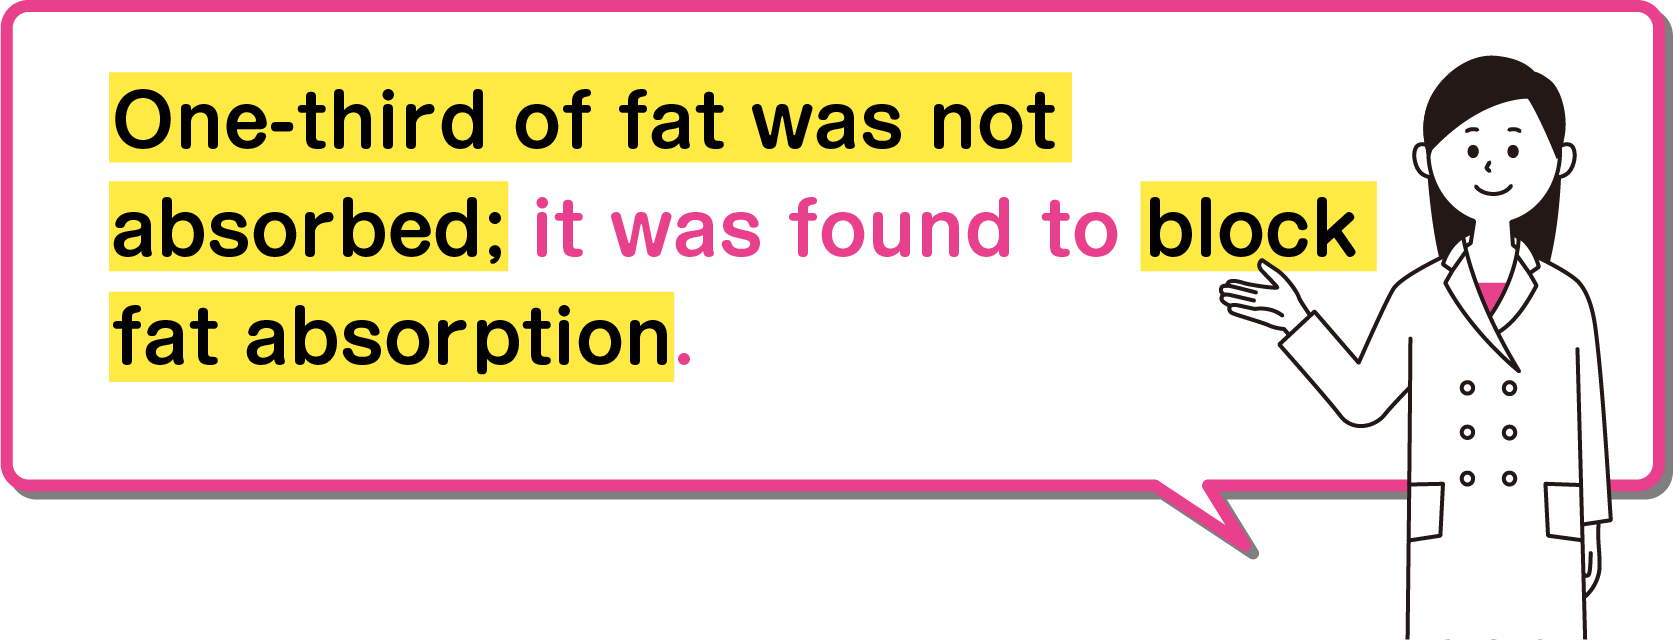 One-third of fat was not absorbed; it was found to block fat absorption.